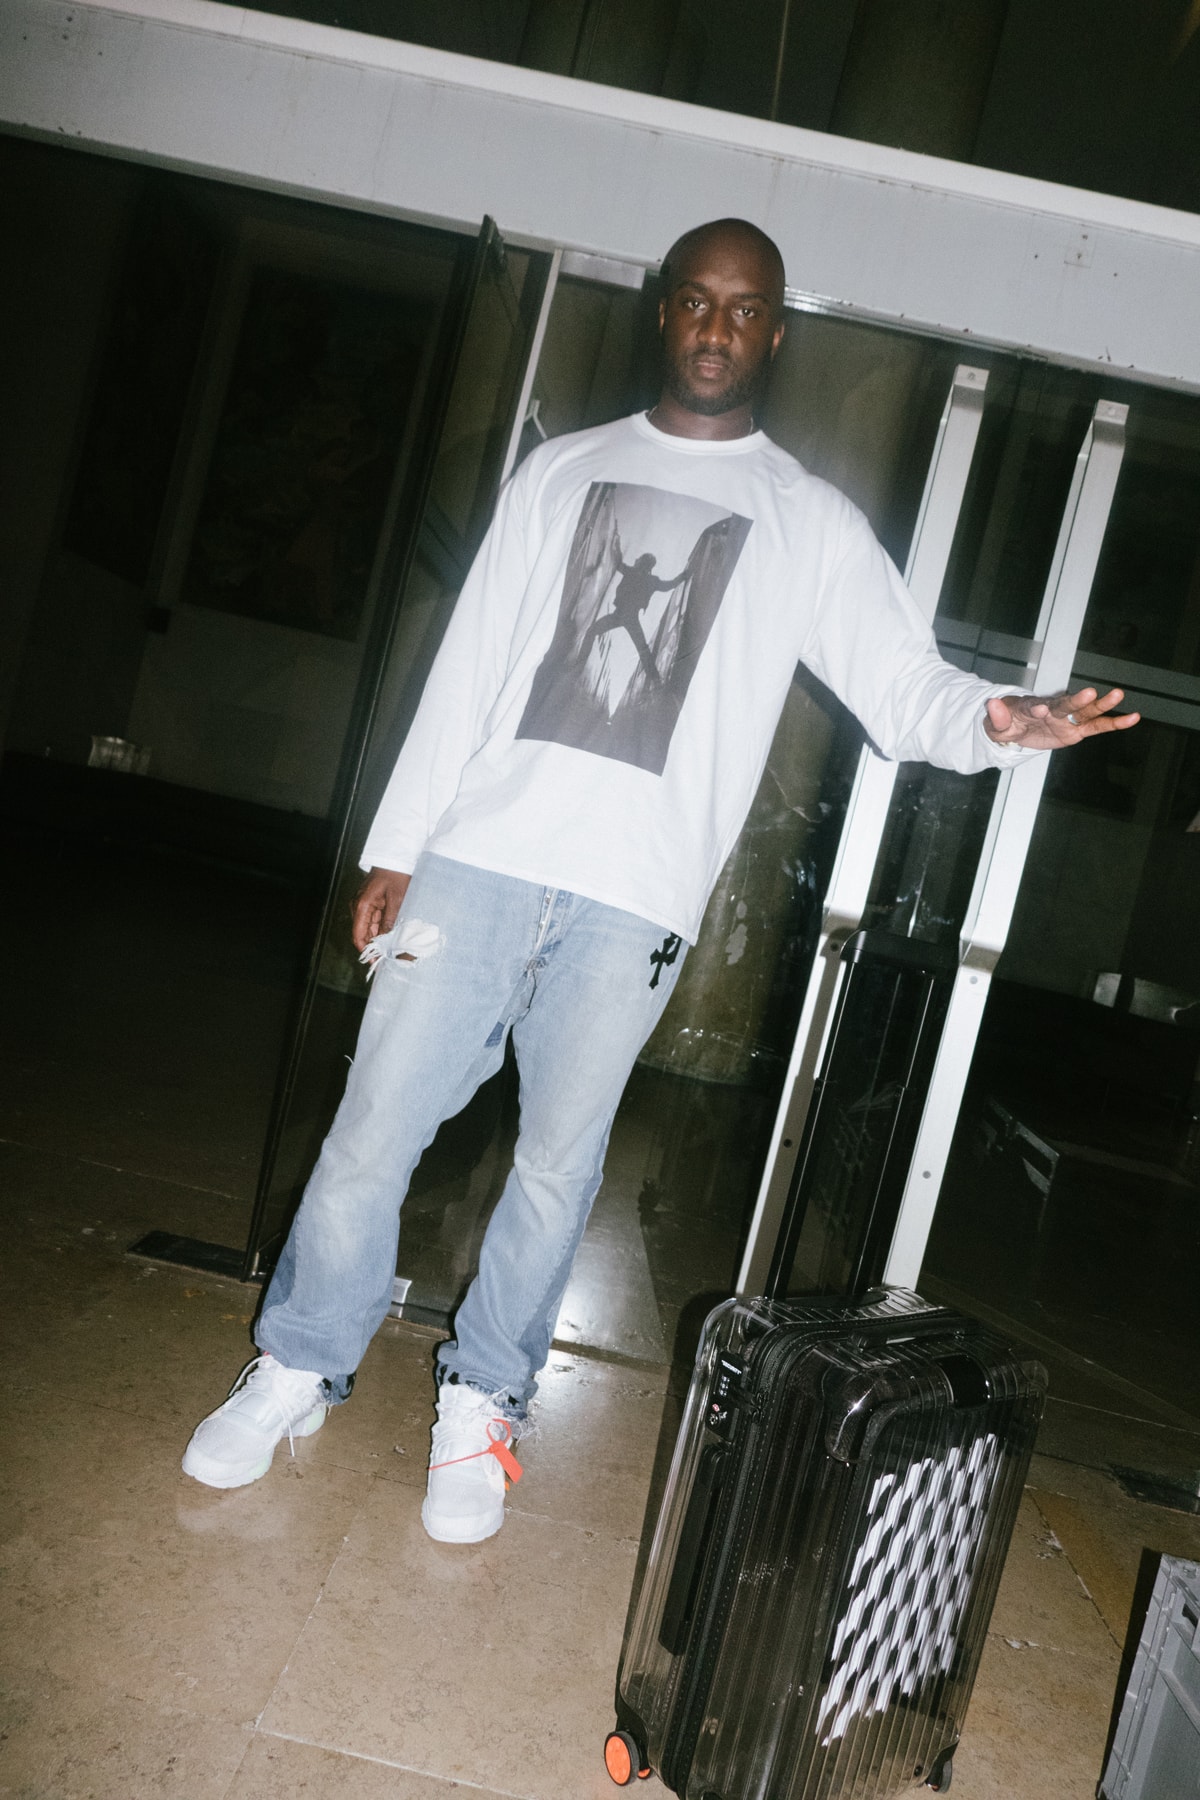 Virgil Abloh on how Louis Vuitton and Rimowa can reach younger people